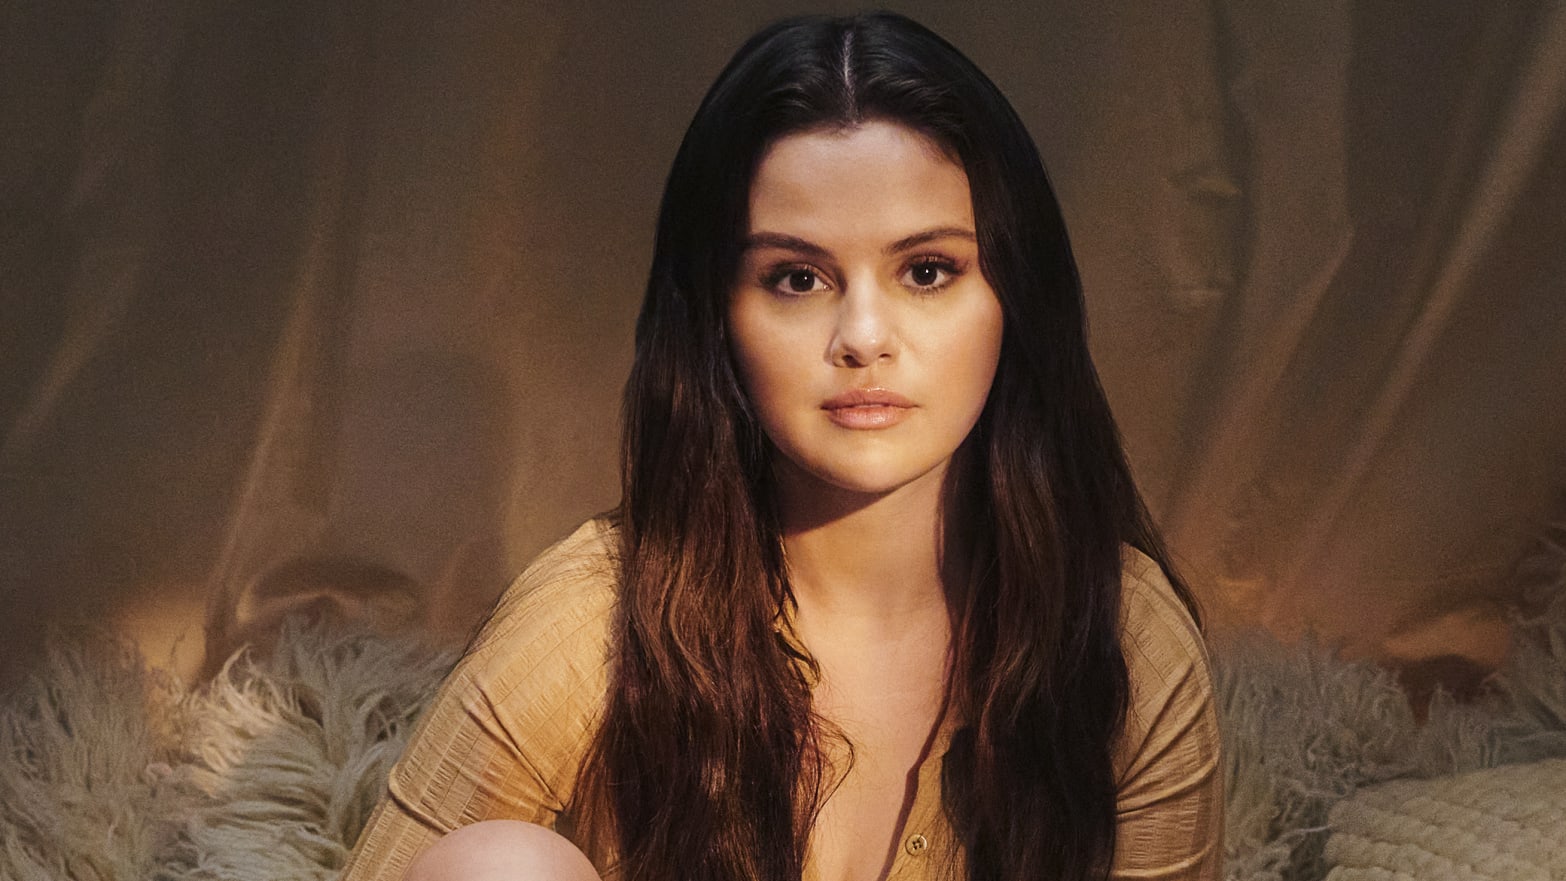 Selena Gomez Opens Up About Mental and Physical Health Struggles in New